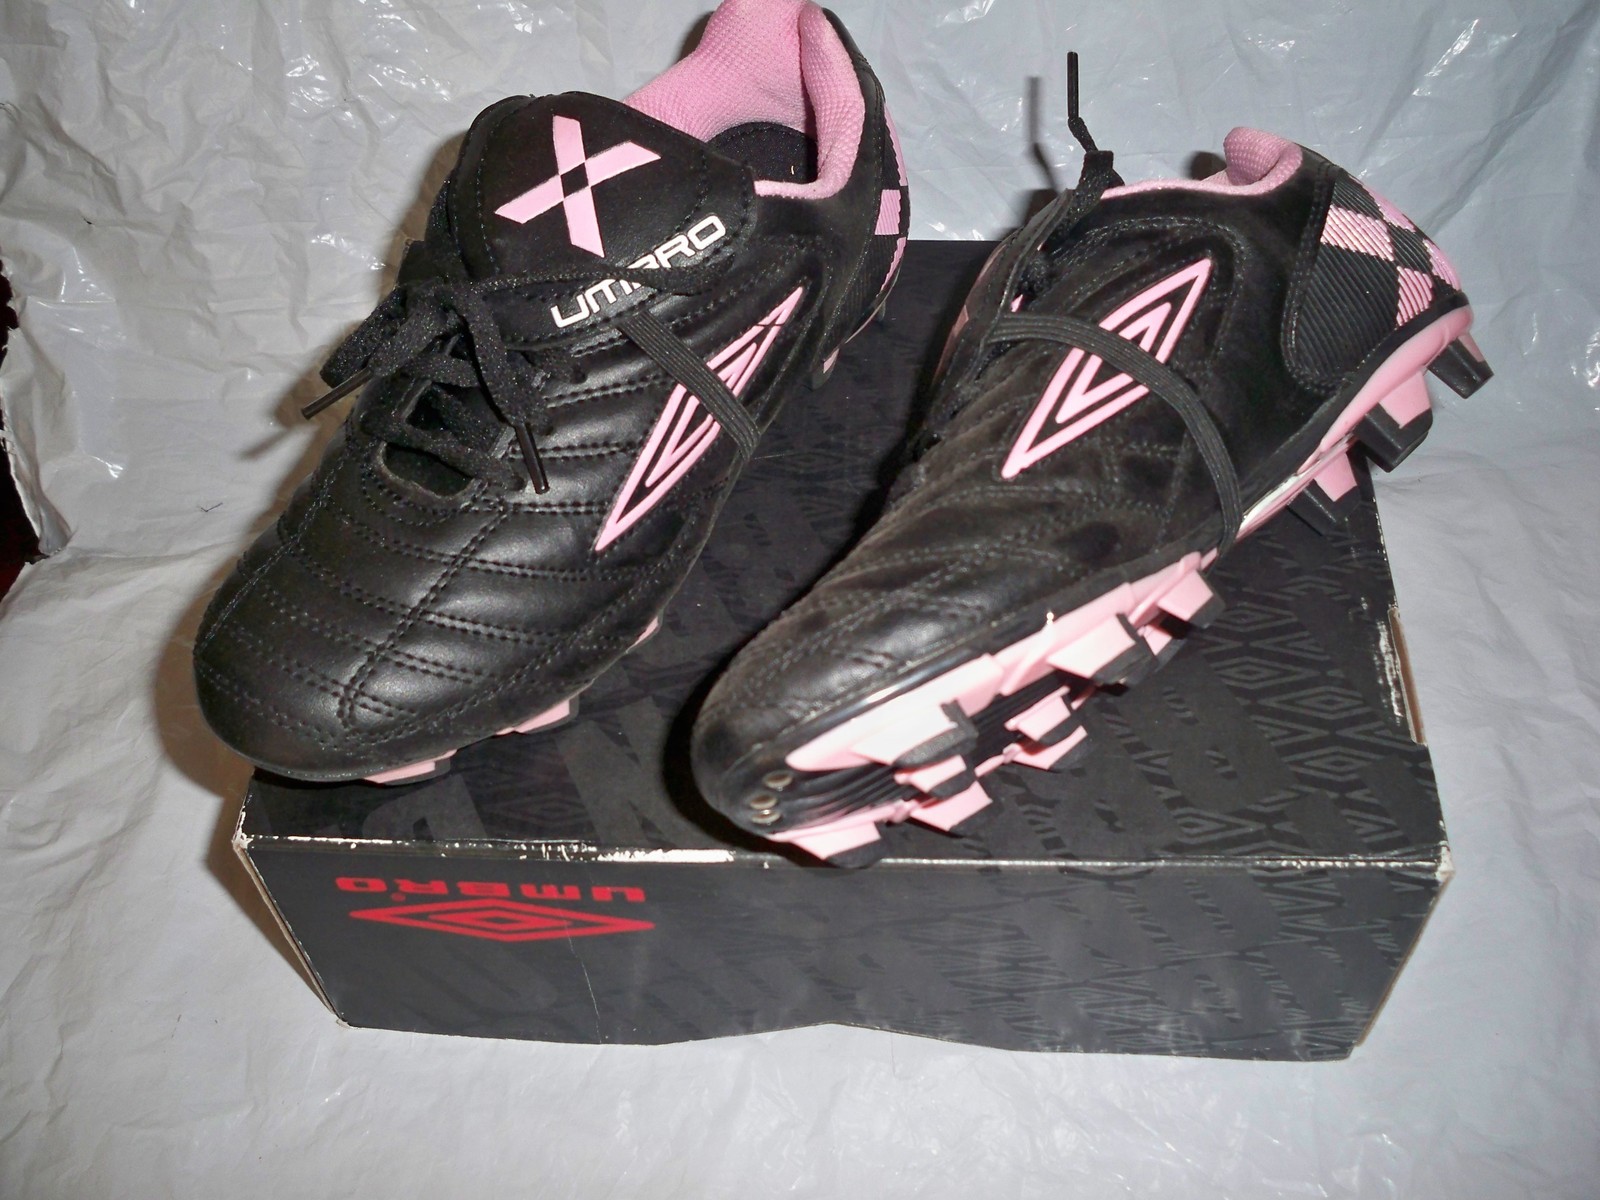 WOMEN'S UMBRO CORSICA FORCE SOCCER CLEATS SHOES BLACK/PINK NEW $68 SIZE 6 - $48.99